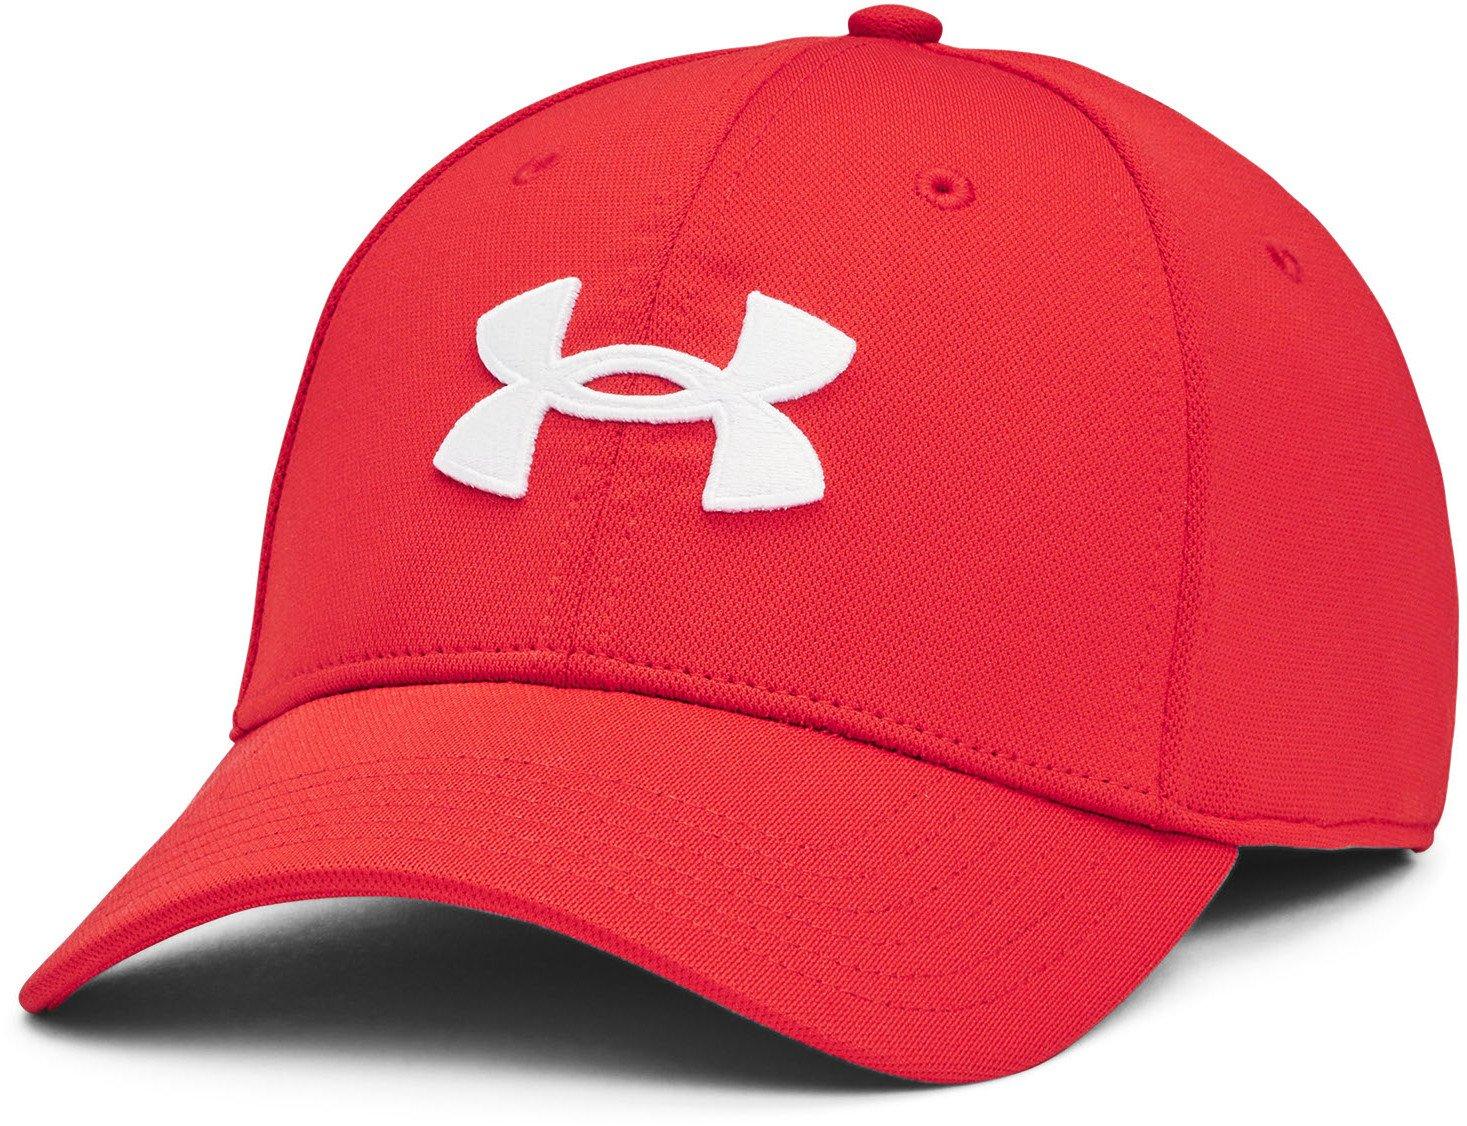 Under Armour Blitzing-RED S/M